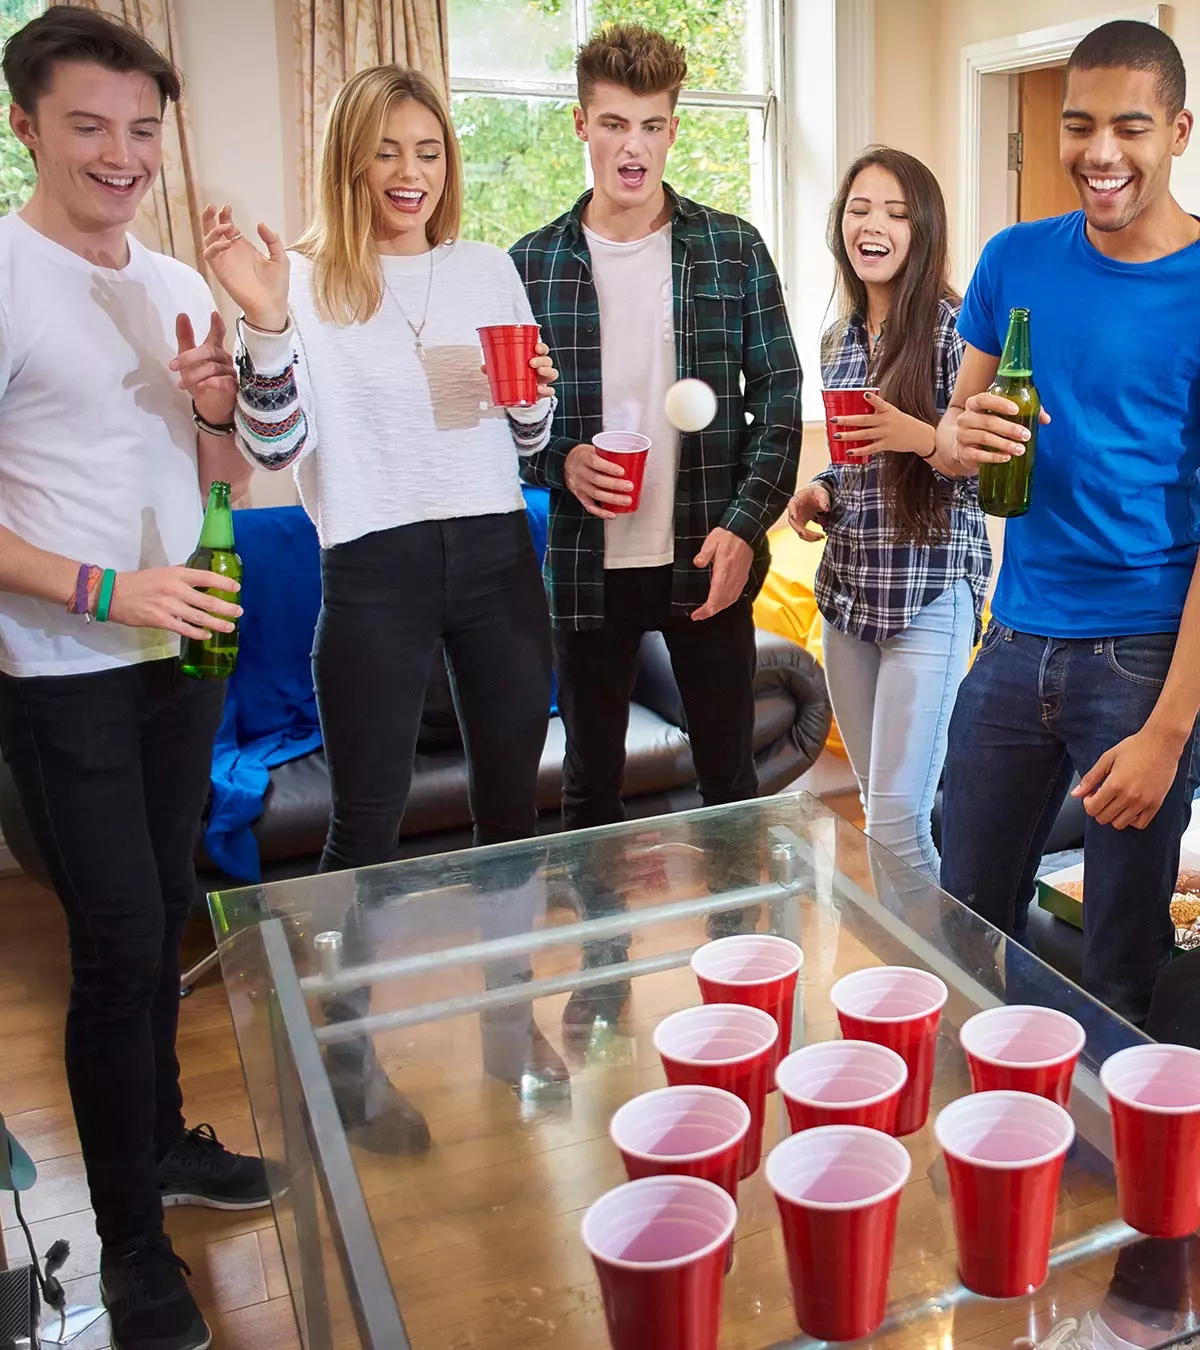 25 Interesting And Fun Things To Do With Teens On Weekend